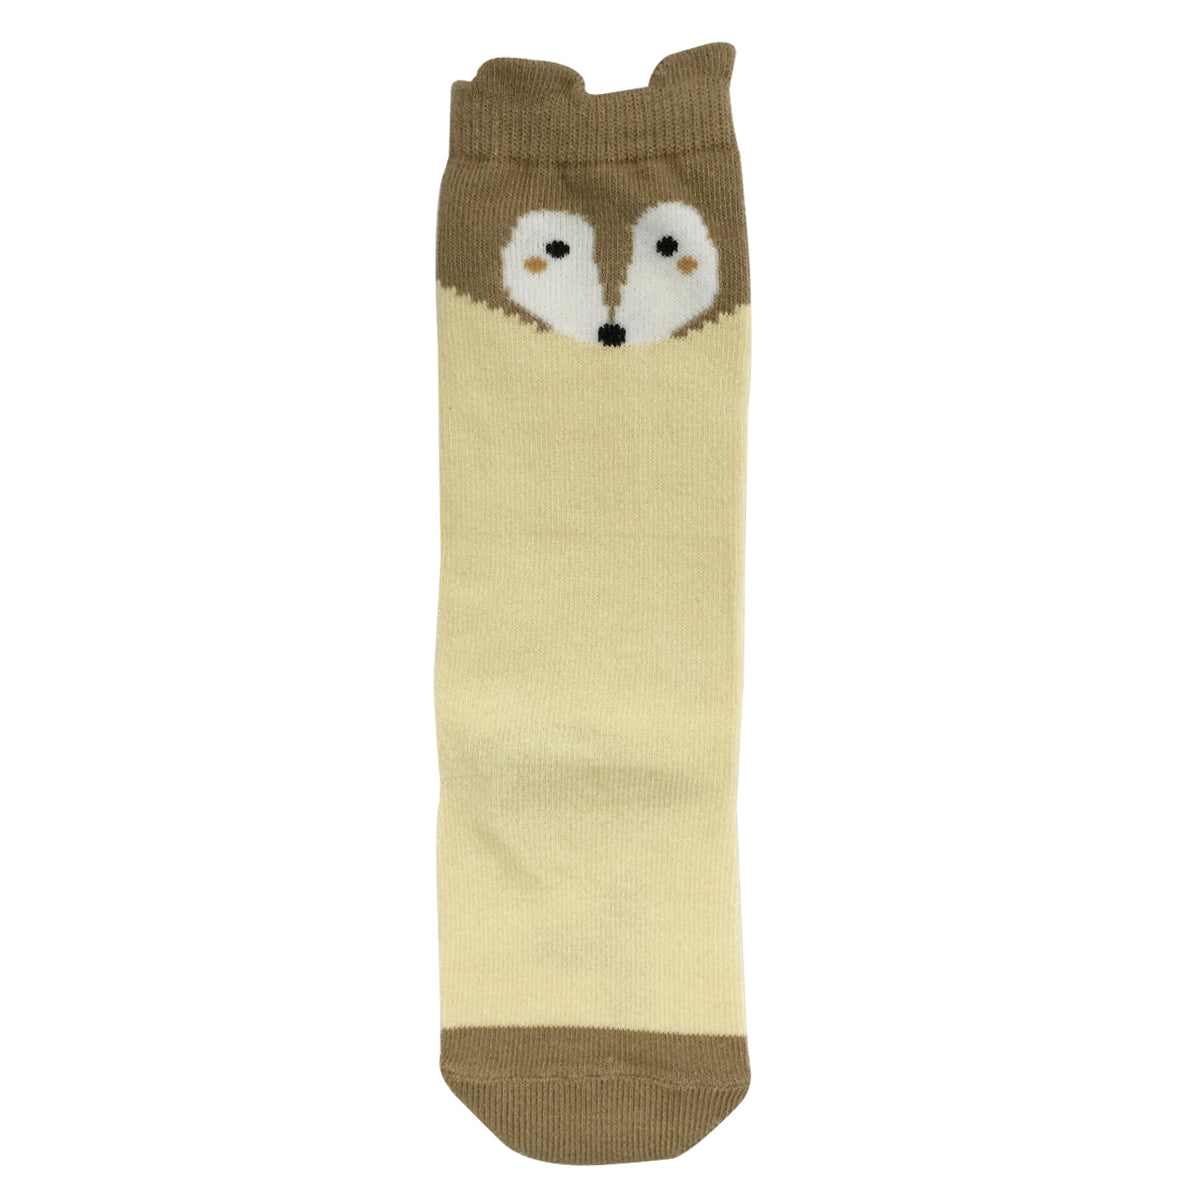 Wrapables My Best Buddy Socks for Baby (Set of 6), Arctic Buddies